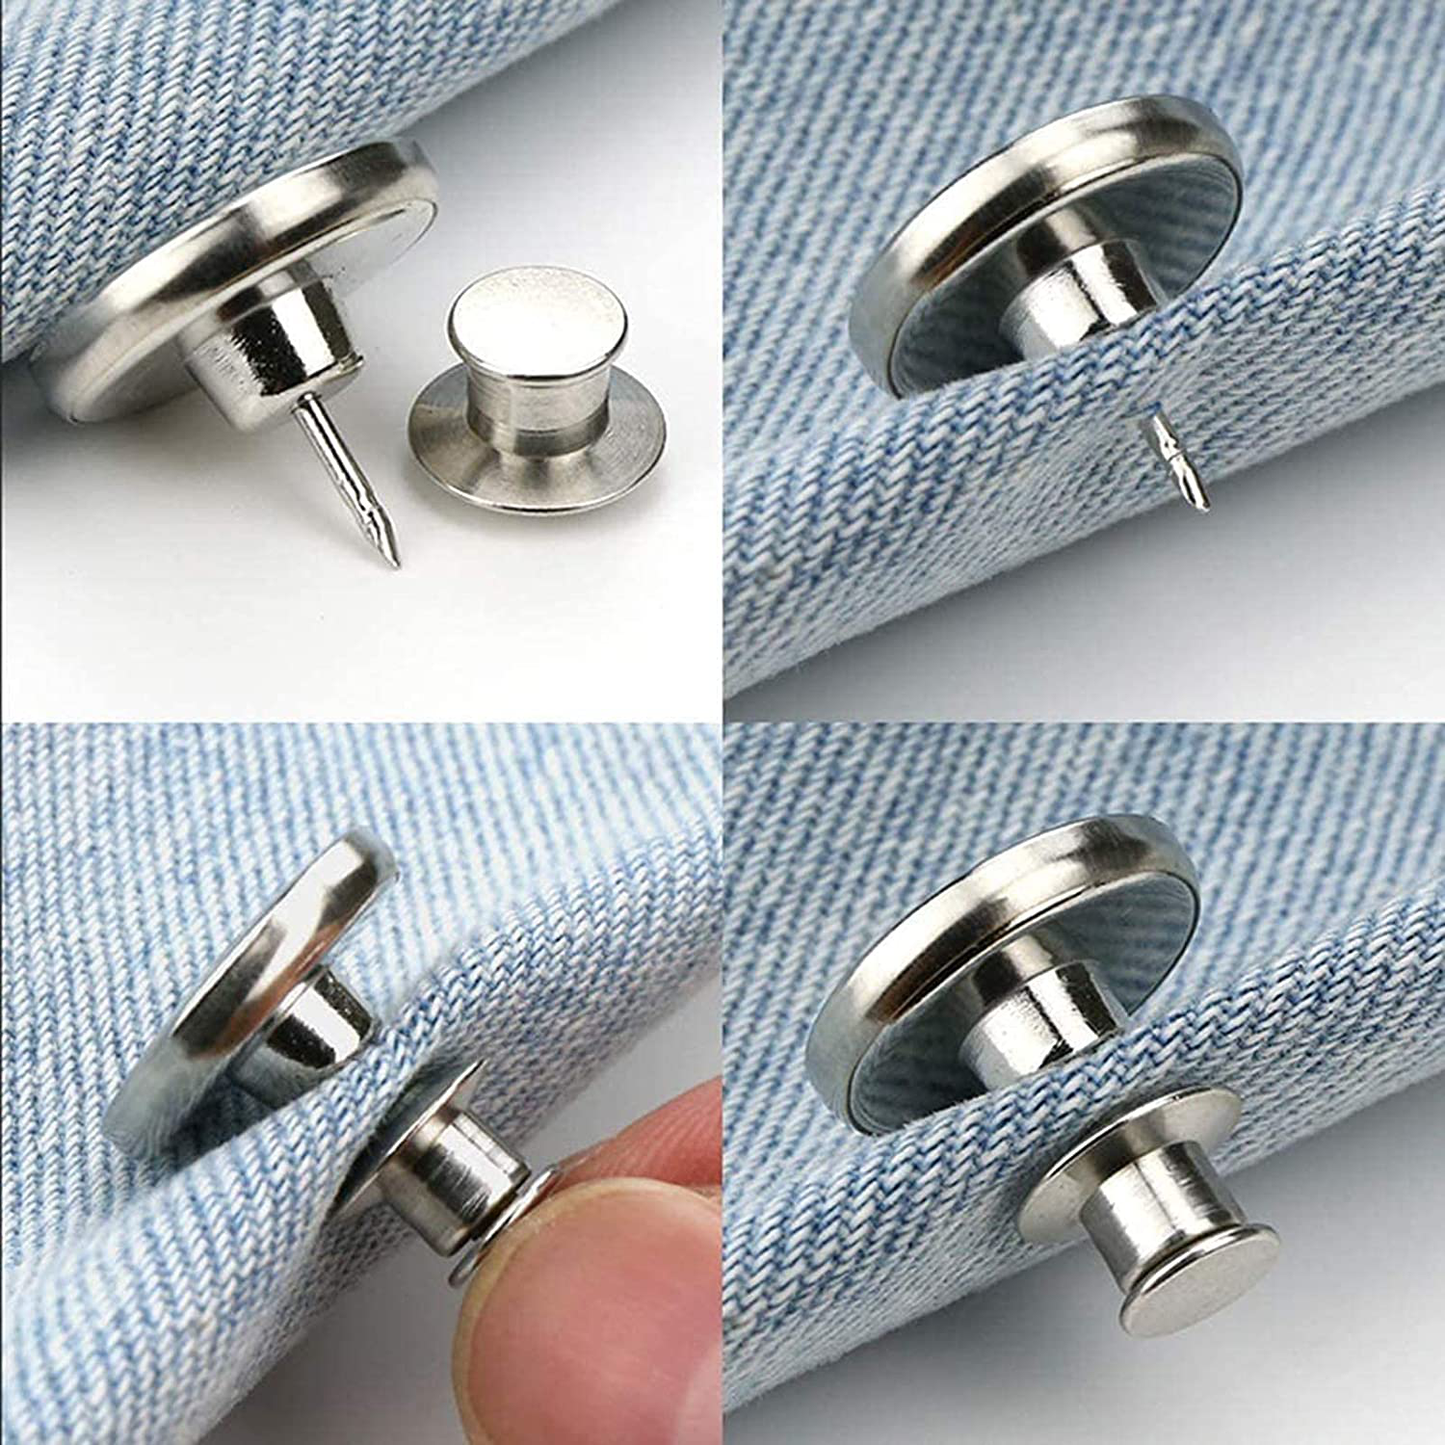 [Upgraded] 8 Sets Button Pins for Jeans No Sew,Toovren Jean Buttons Pins Adjustable, Removable Pants Button Pins, Perfect Fit Instant Jean Button,Button Clips,Metal Button Adds Pants Waist in Seconds